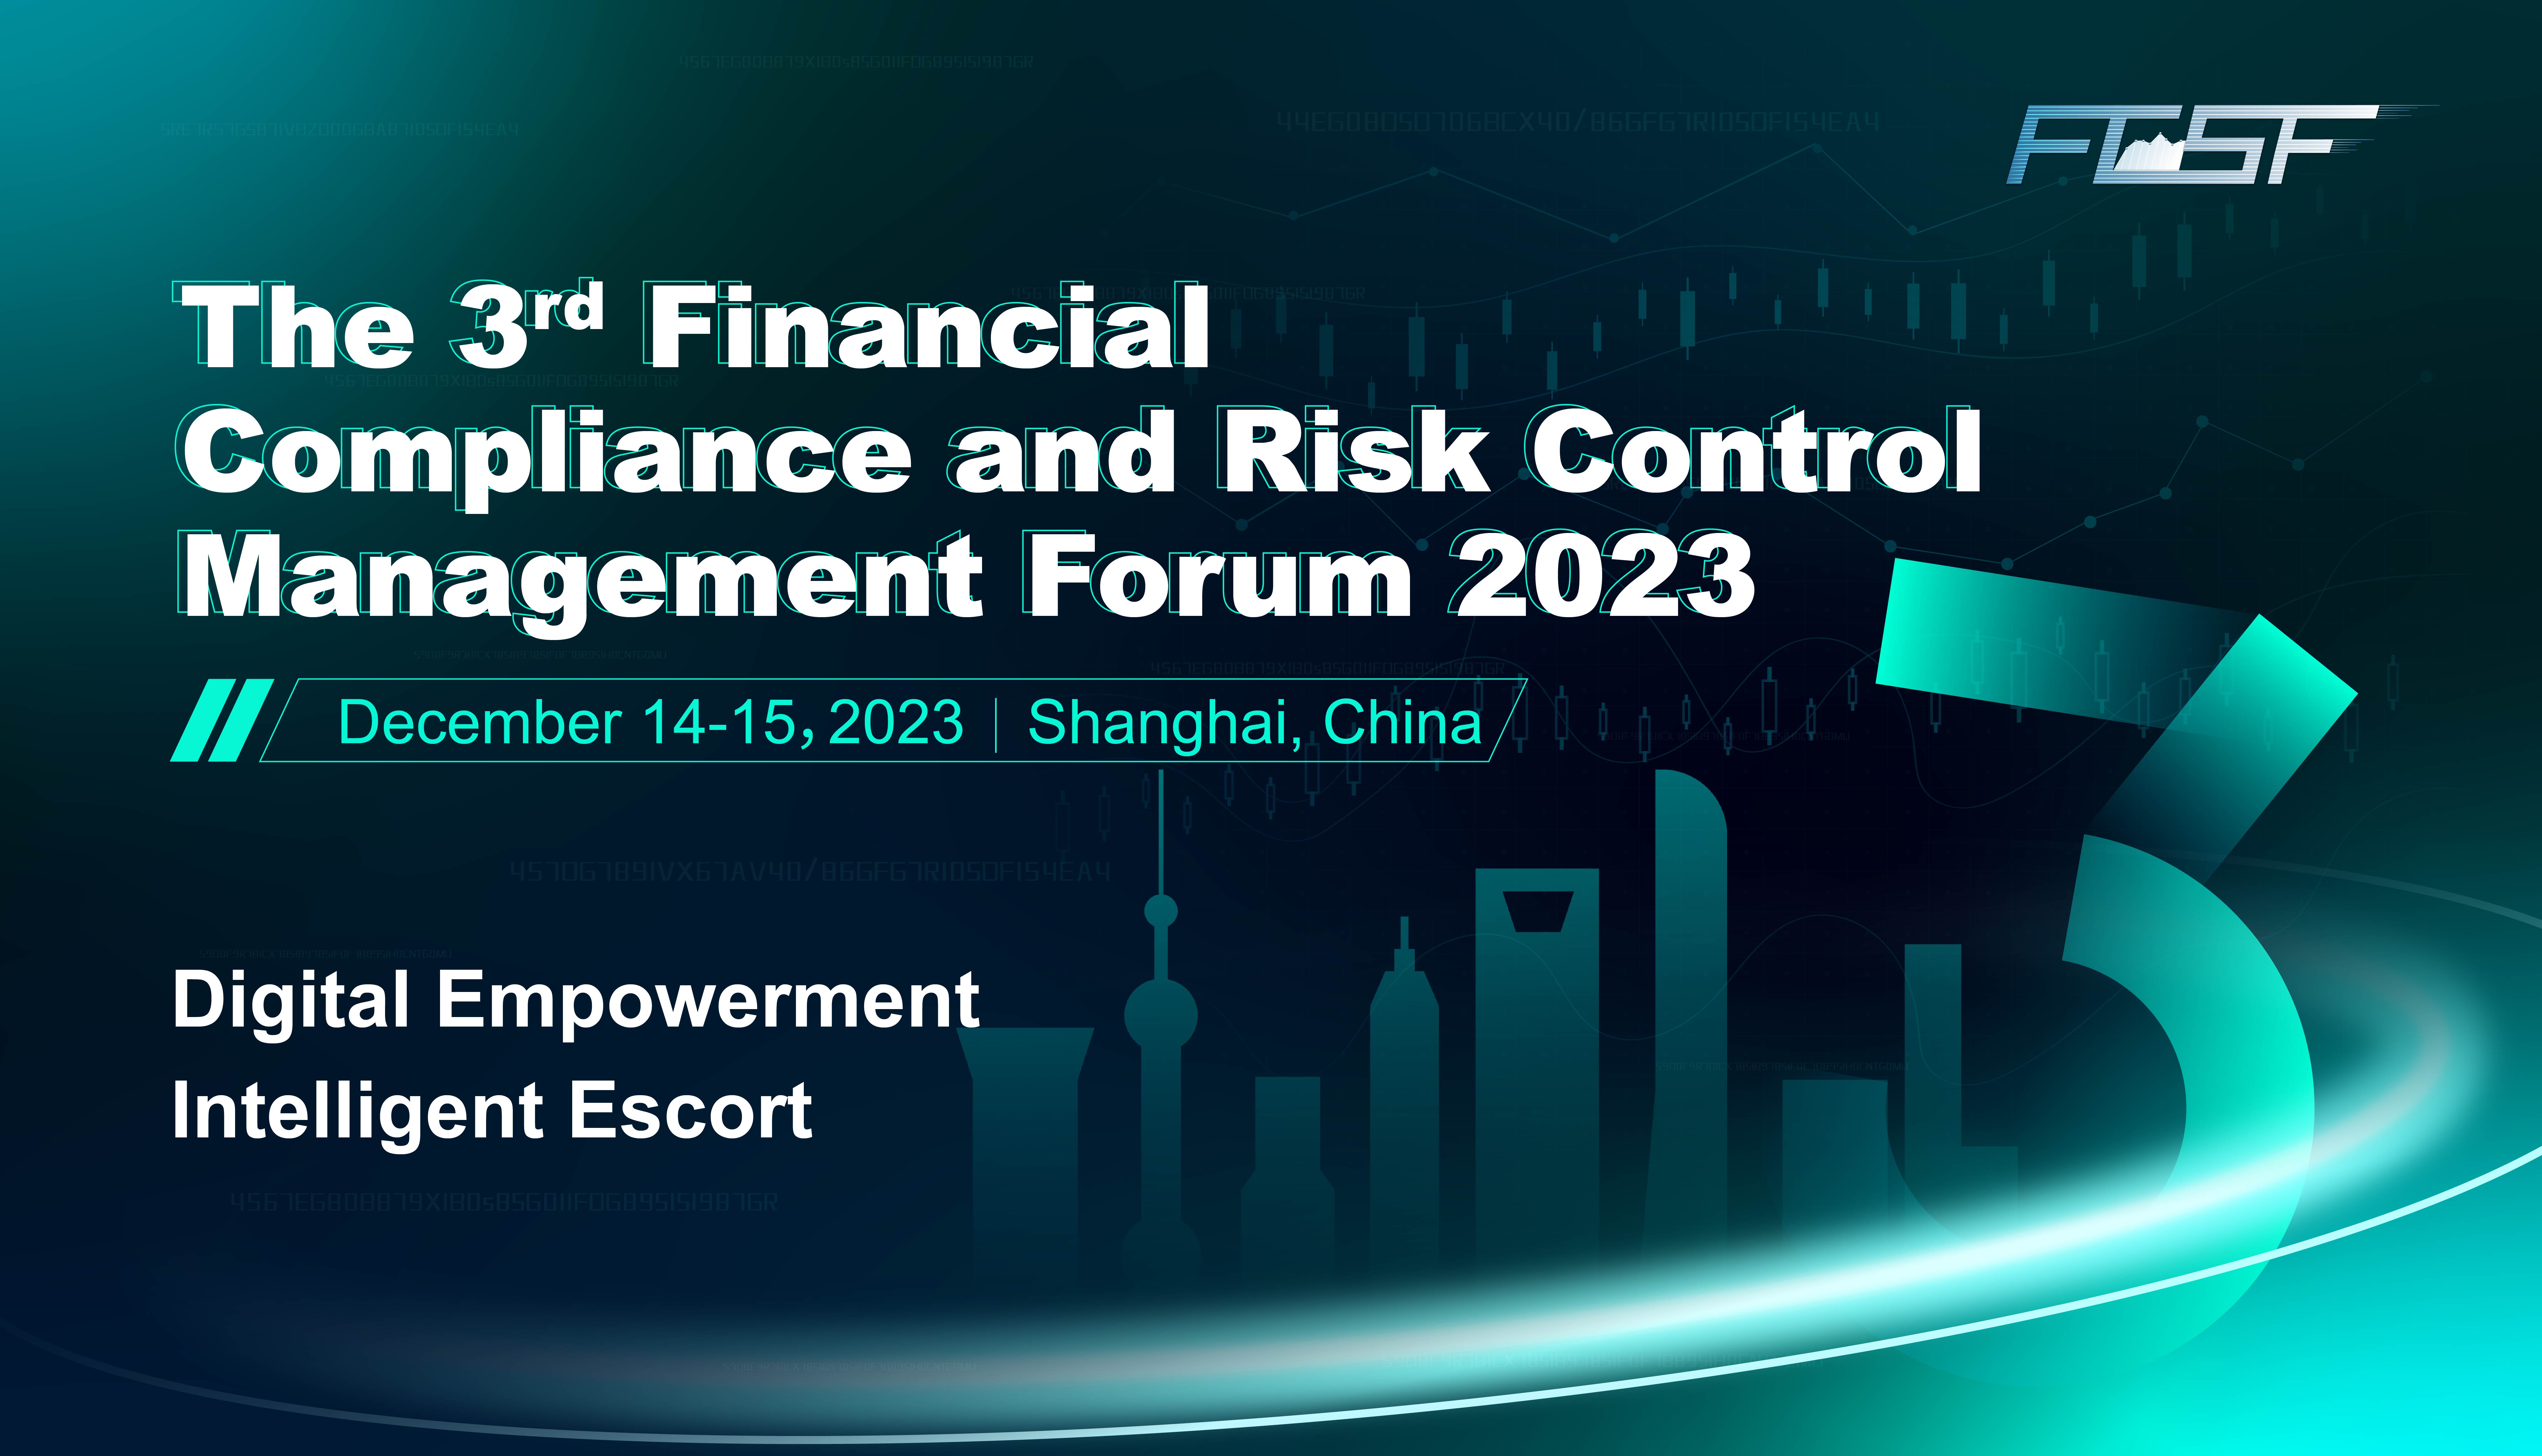 The 3rd Financial Compliance and Risk Control Management Forum